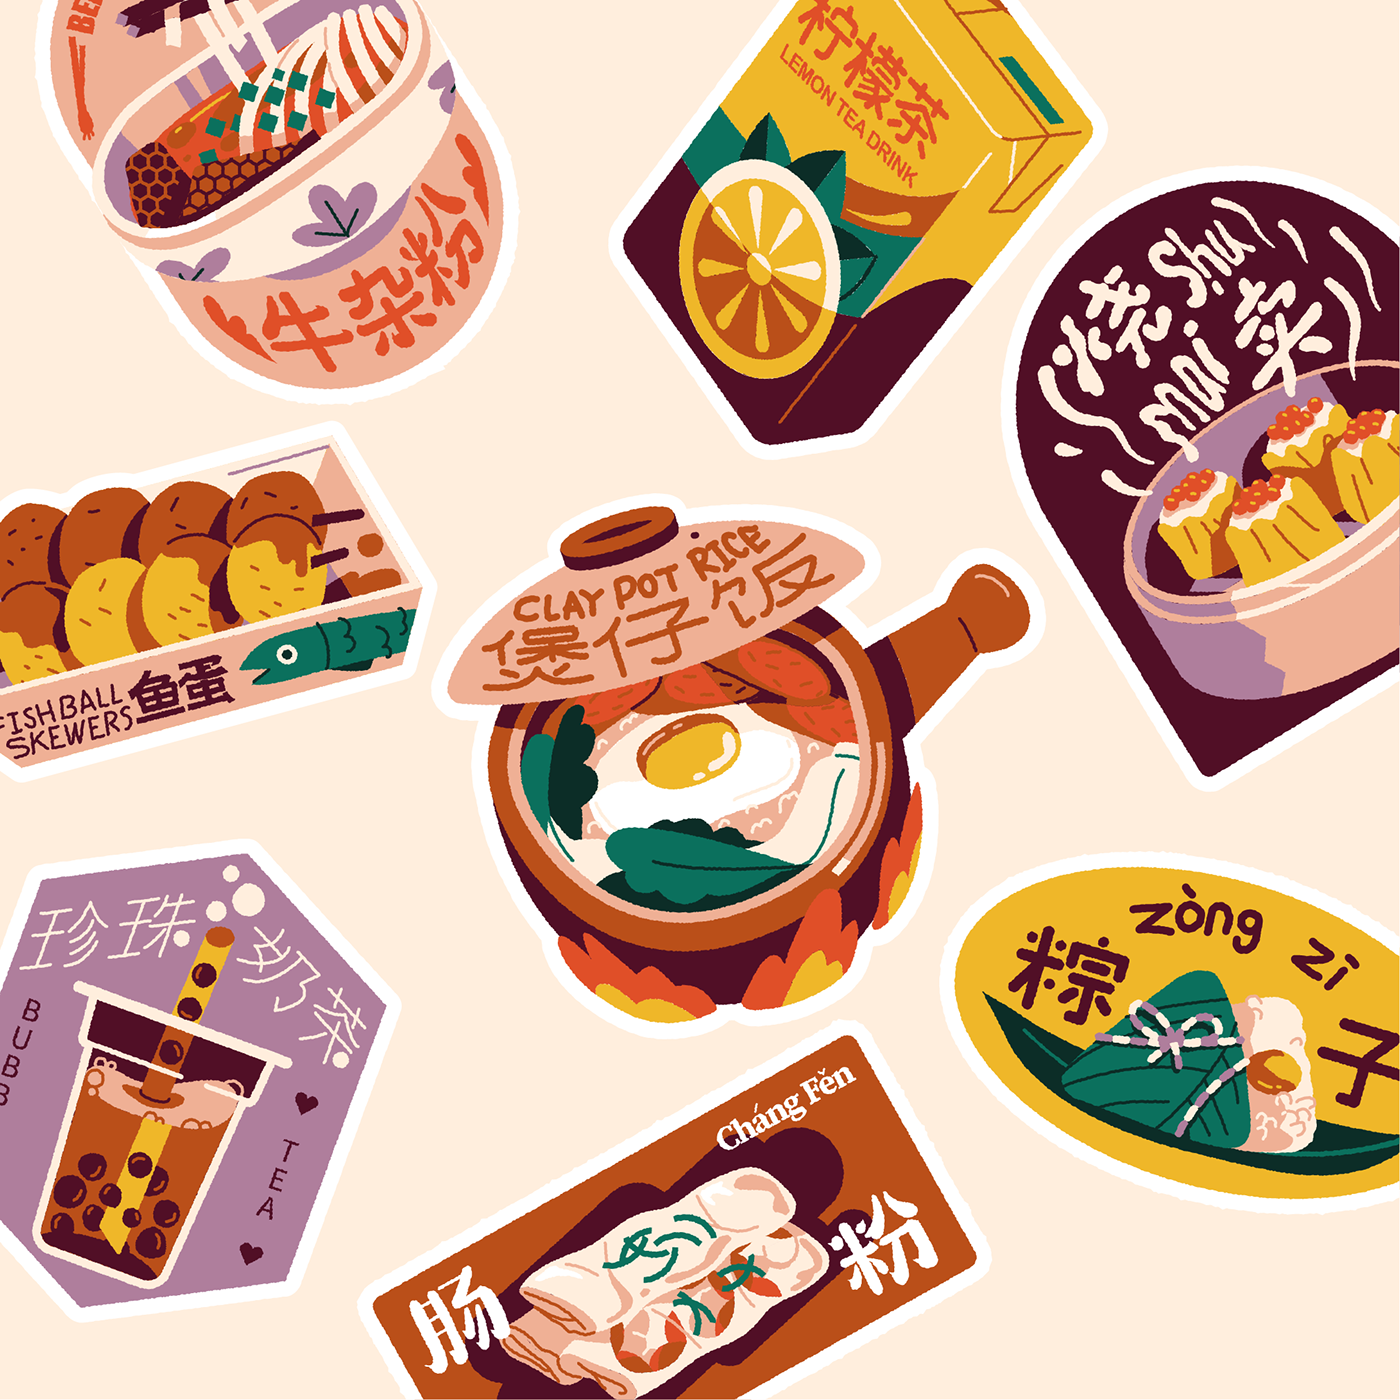 Chinese Food cantonese food food illustration dimsum chinese